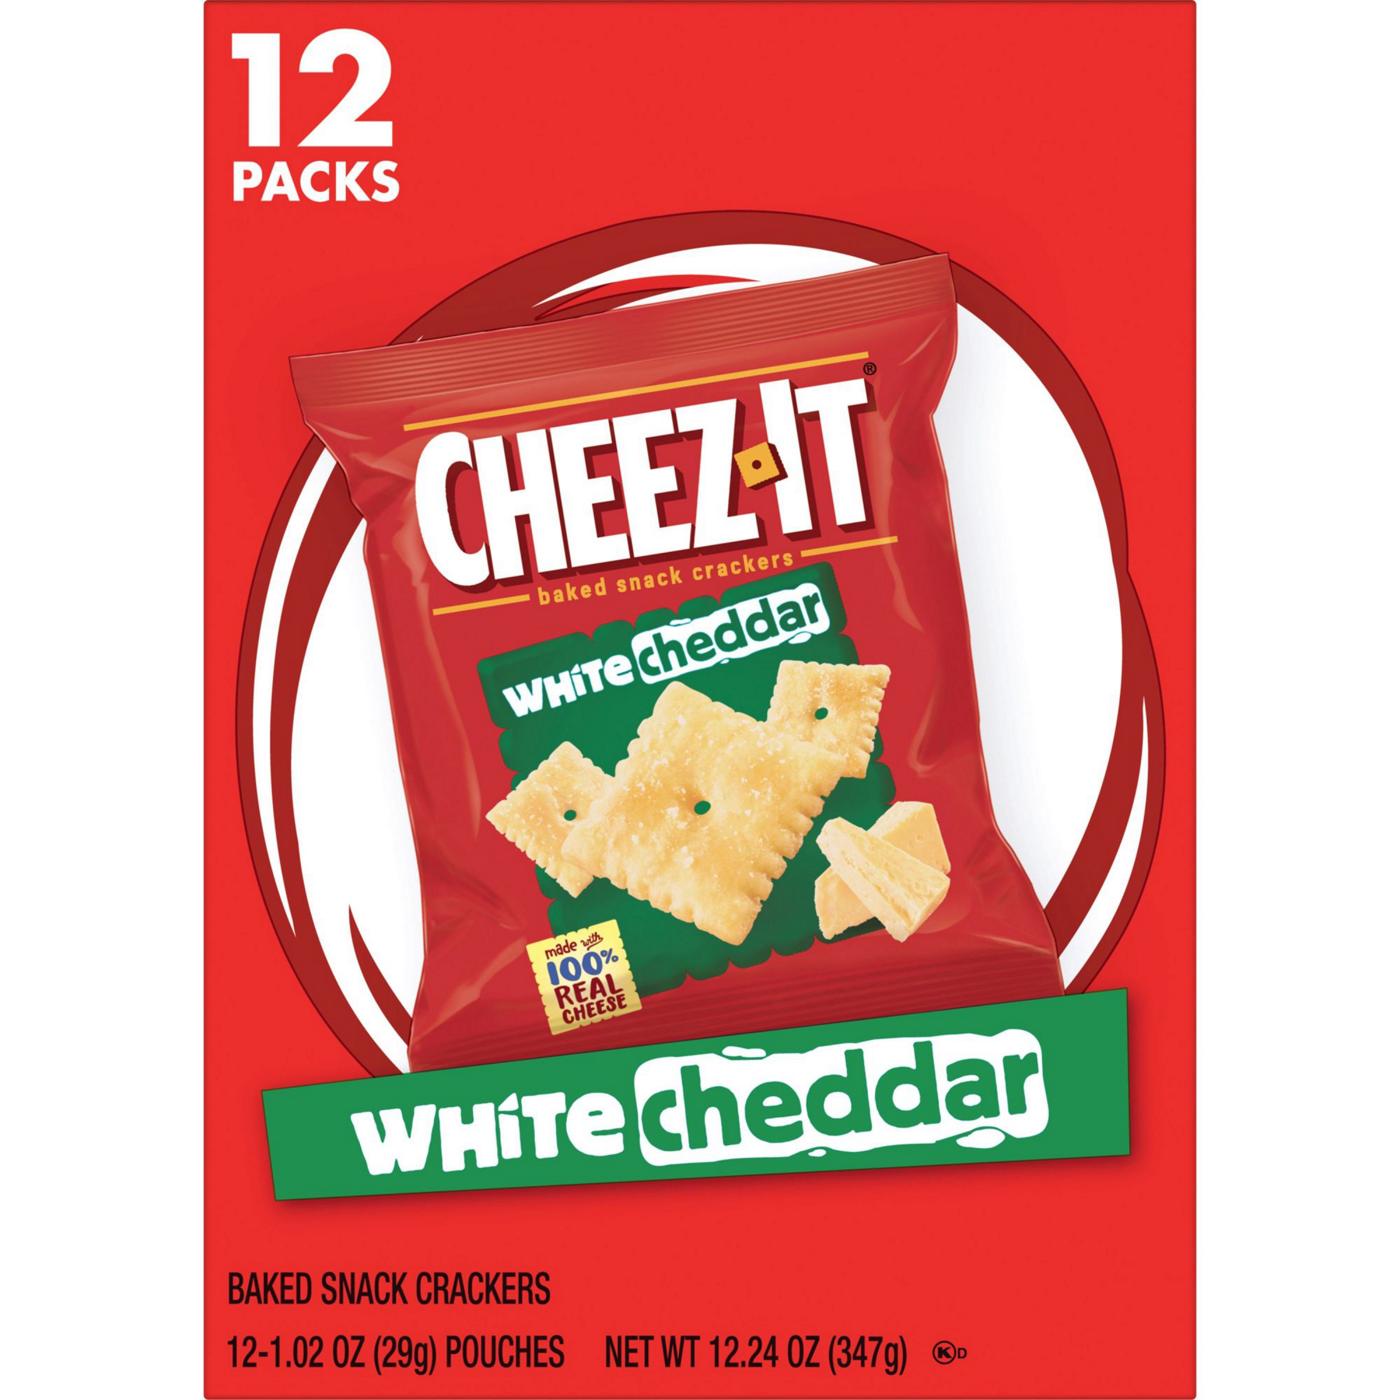 Cheez-It White Cheddar Baked Snack Crackers; image 1 of 4